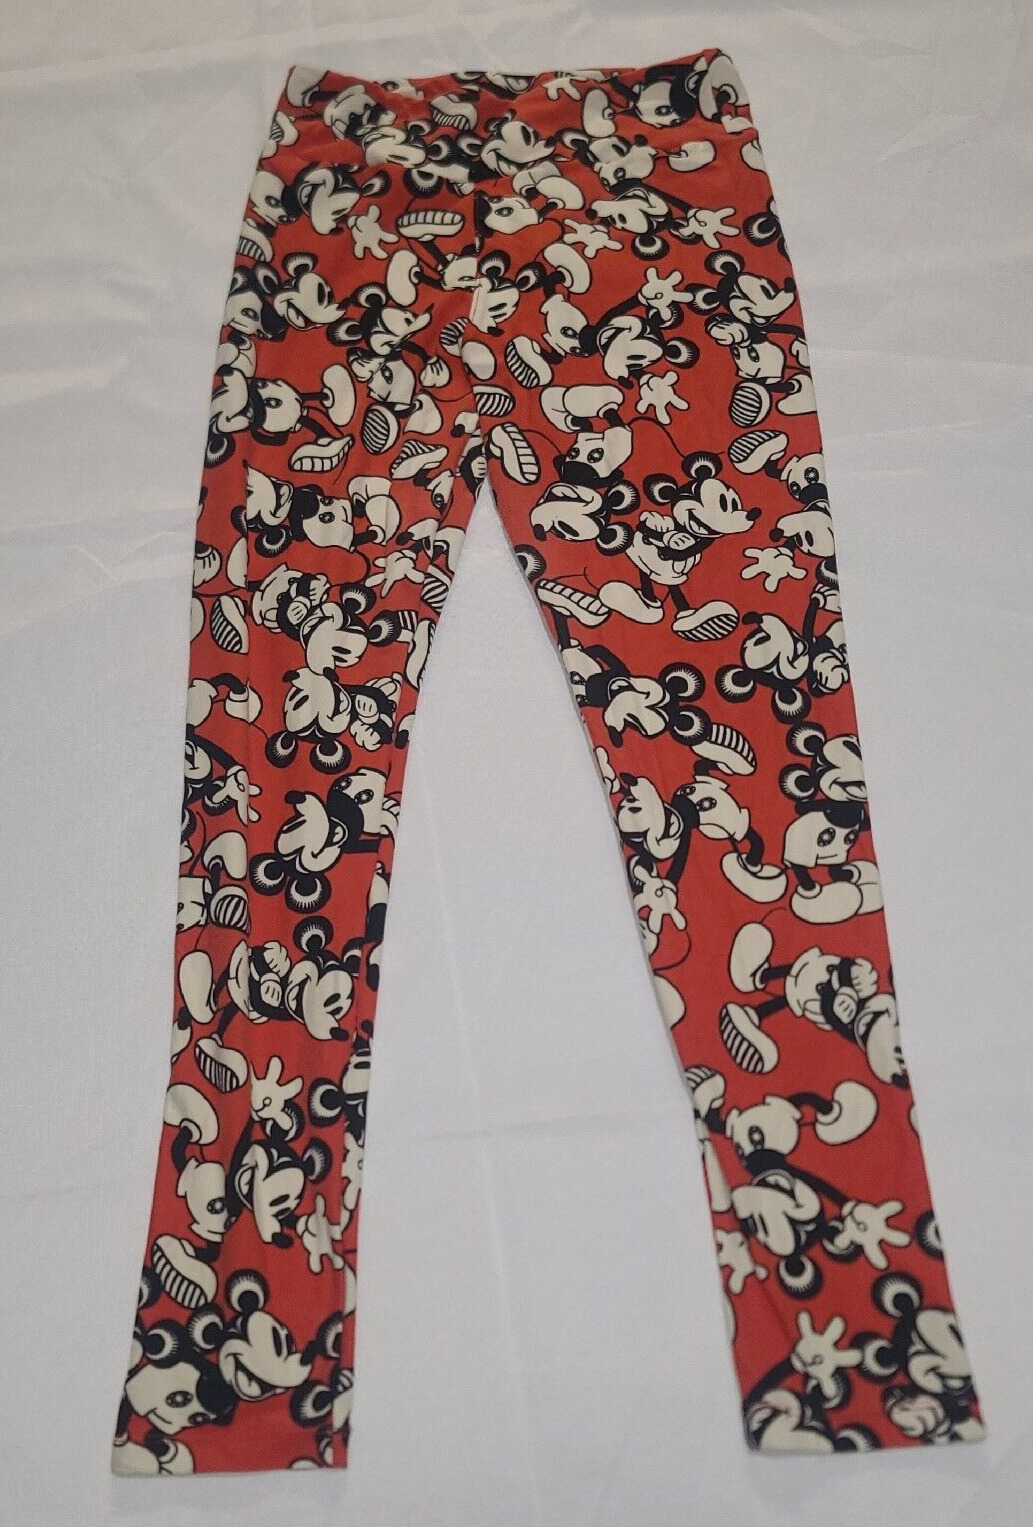 Disney LuLaRoe Leggings One Size Mickey Mouse Red Black Buttery Soft Tall Curvy